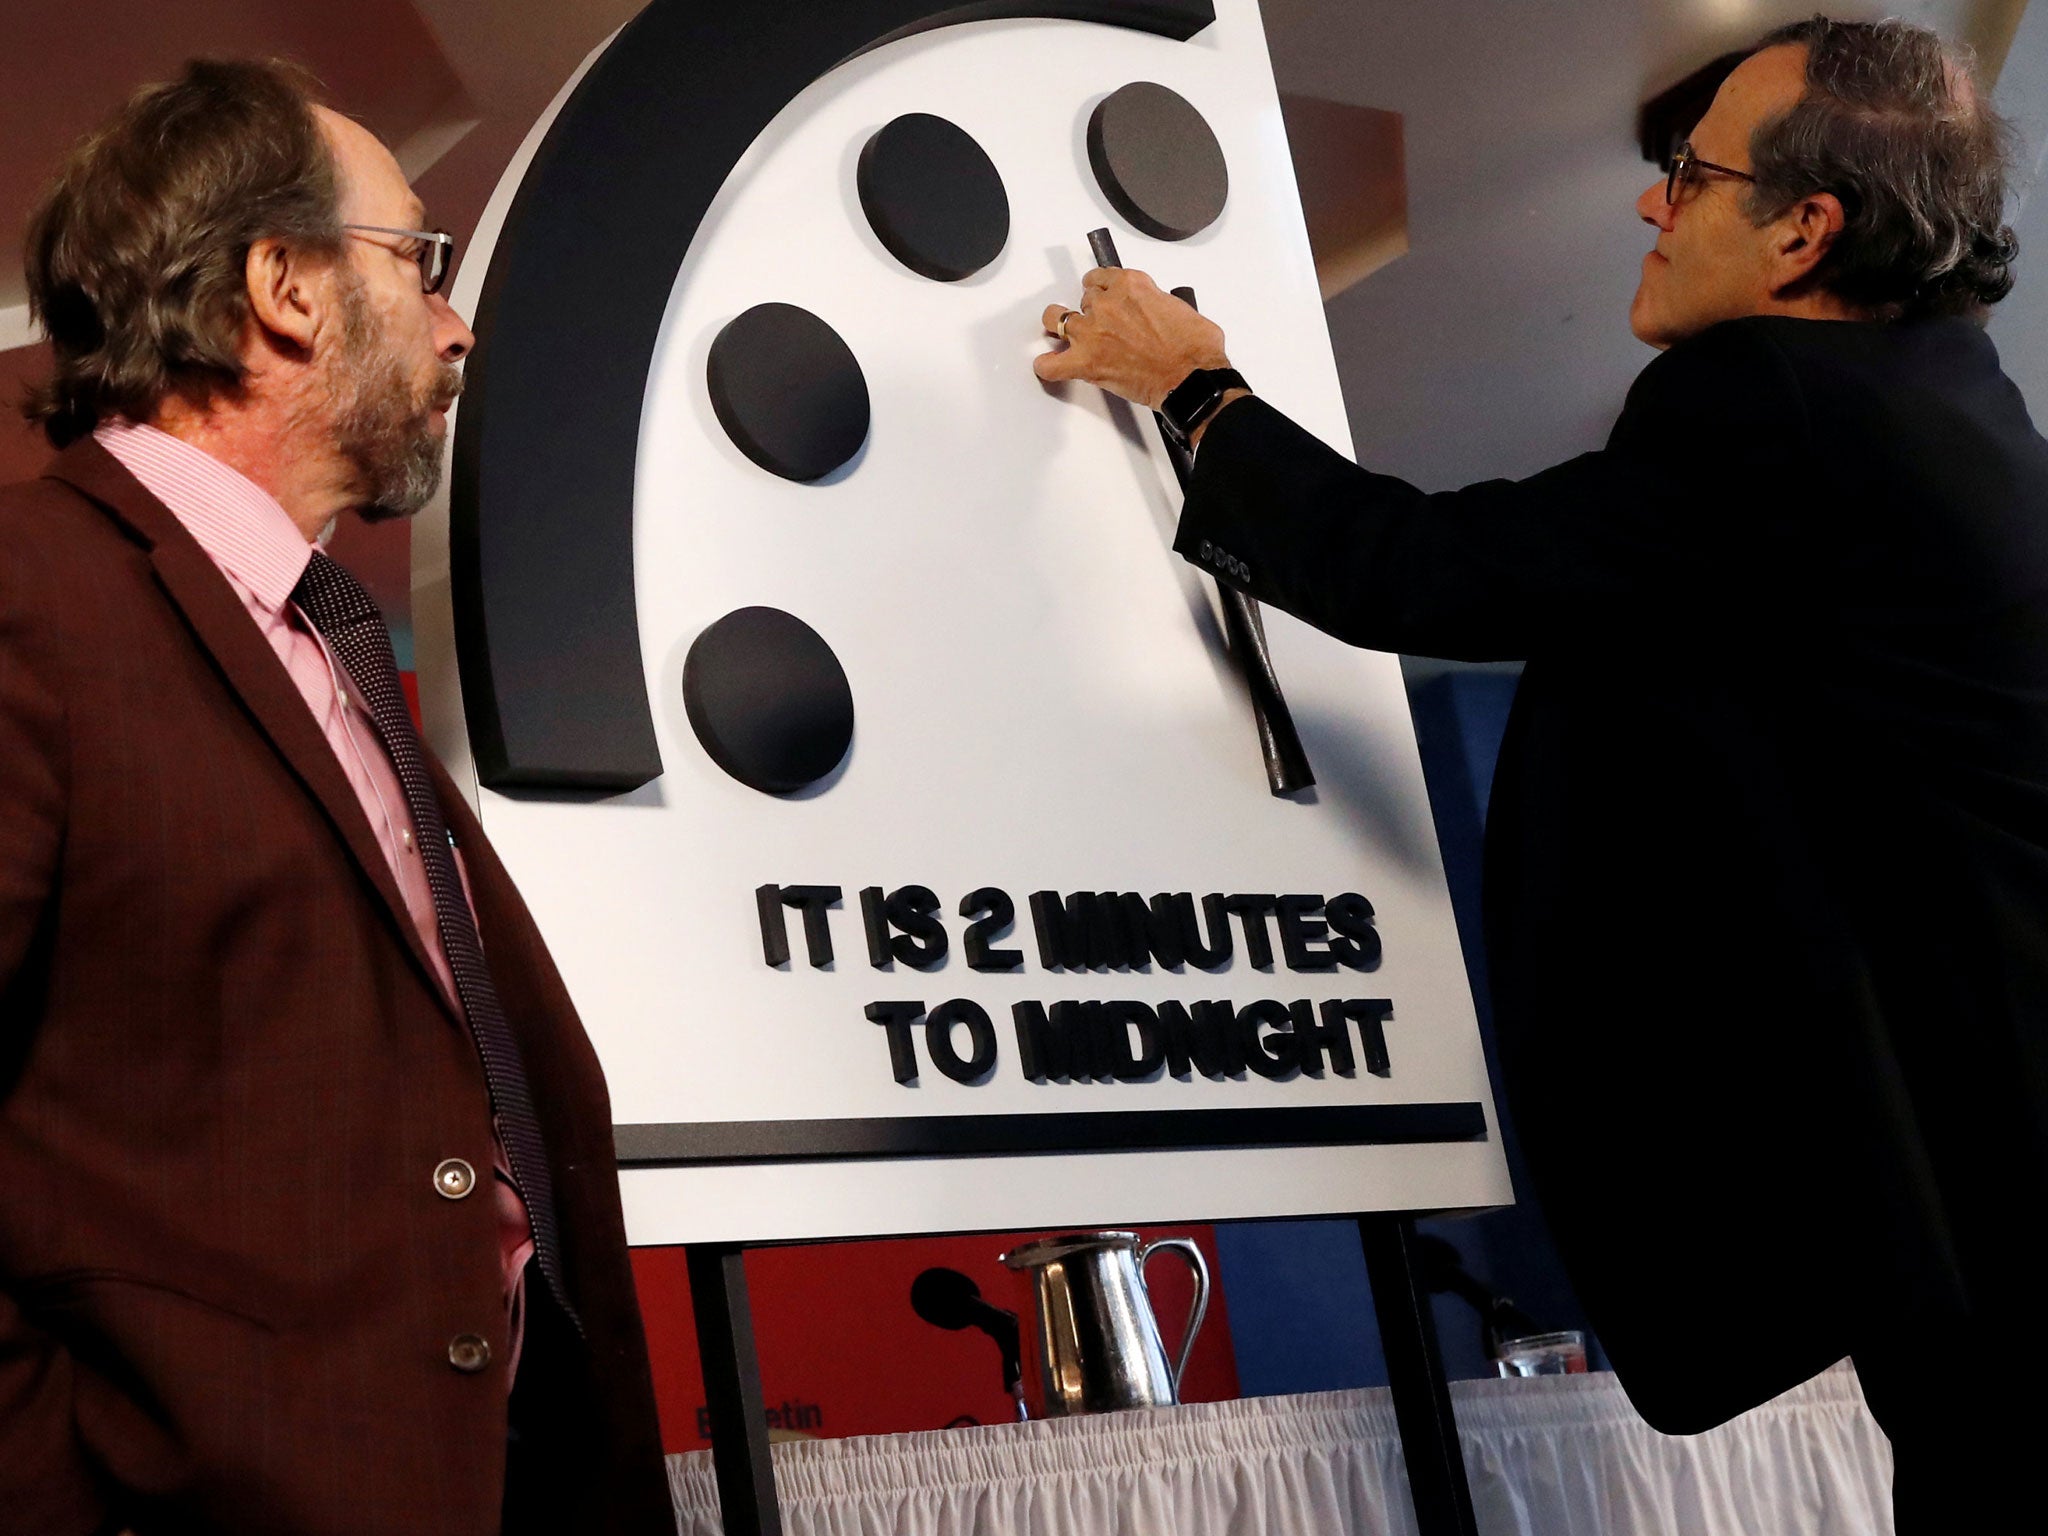 How the Doomsday Clock could help trigger the Armageddon it warns of | The Independent